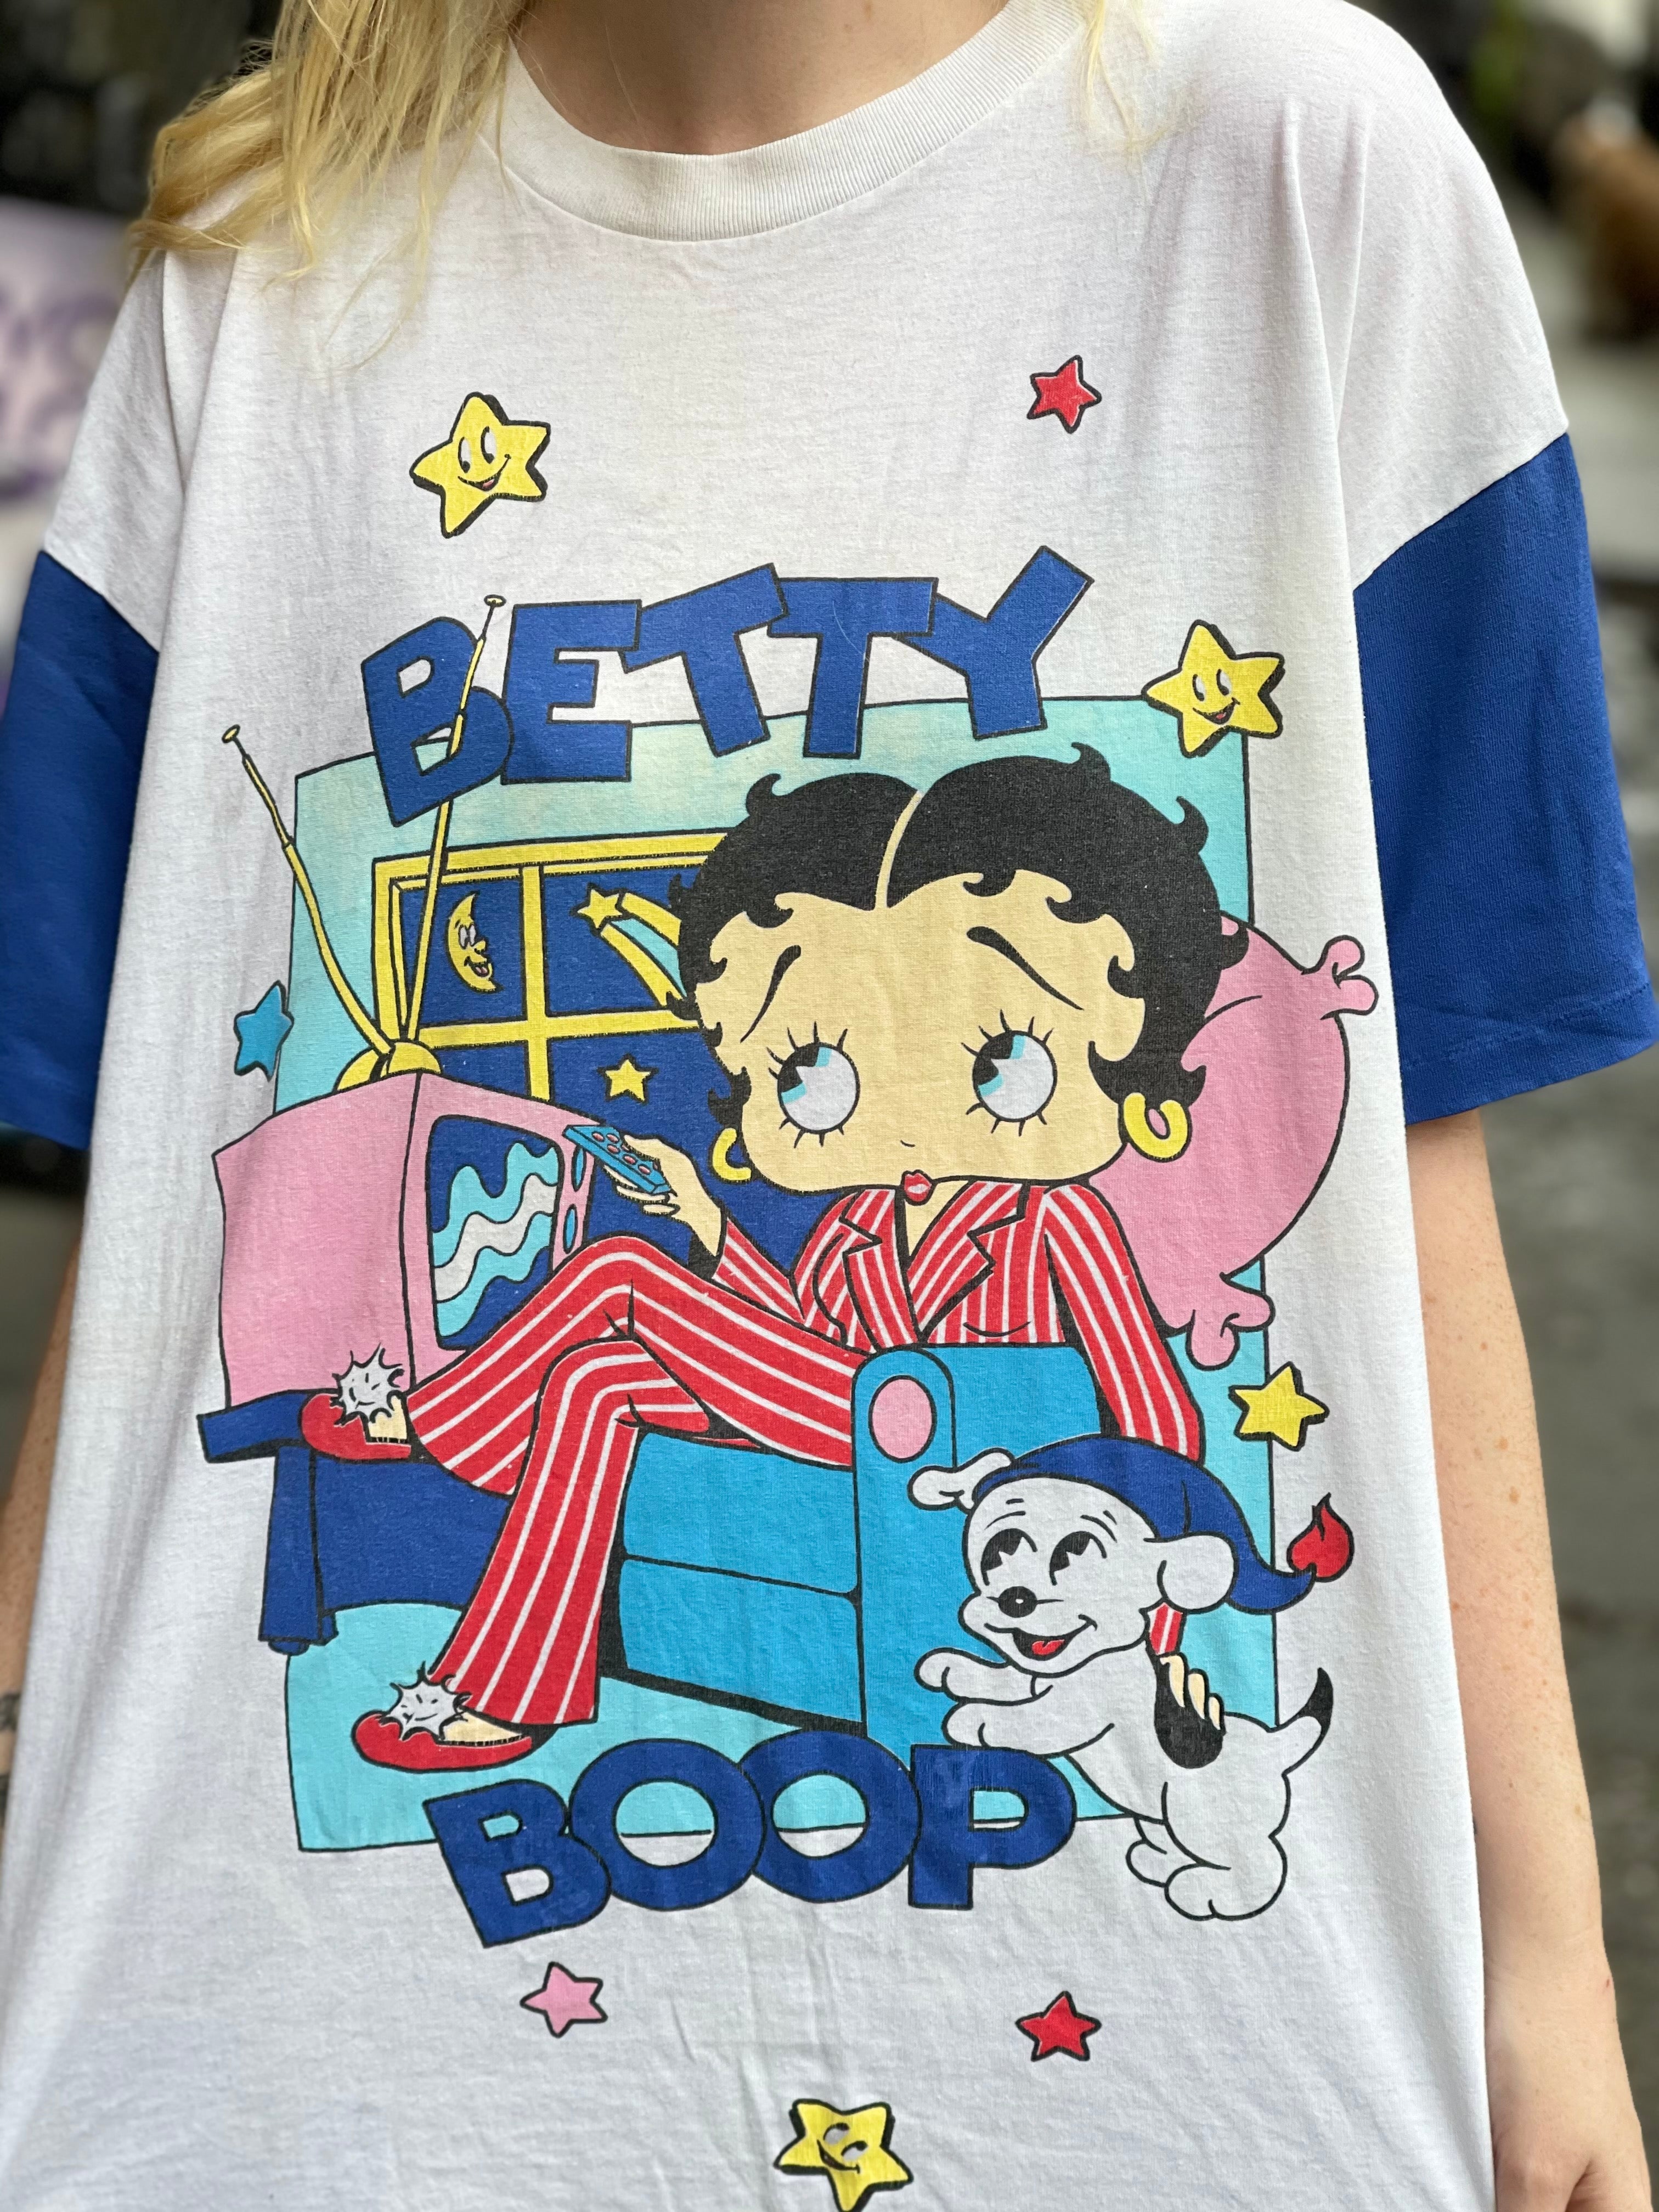 Betty Boop Tee, Stars & Stripes Betty T-shirt, Officially Licensed